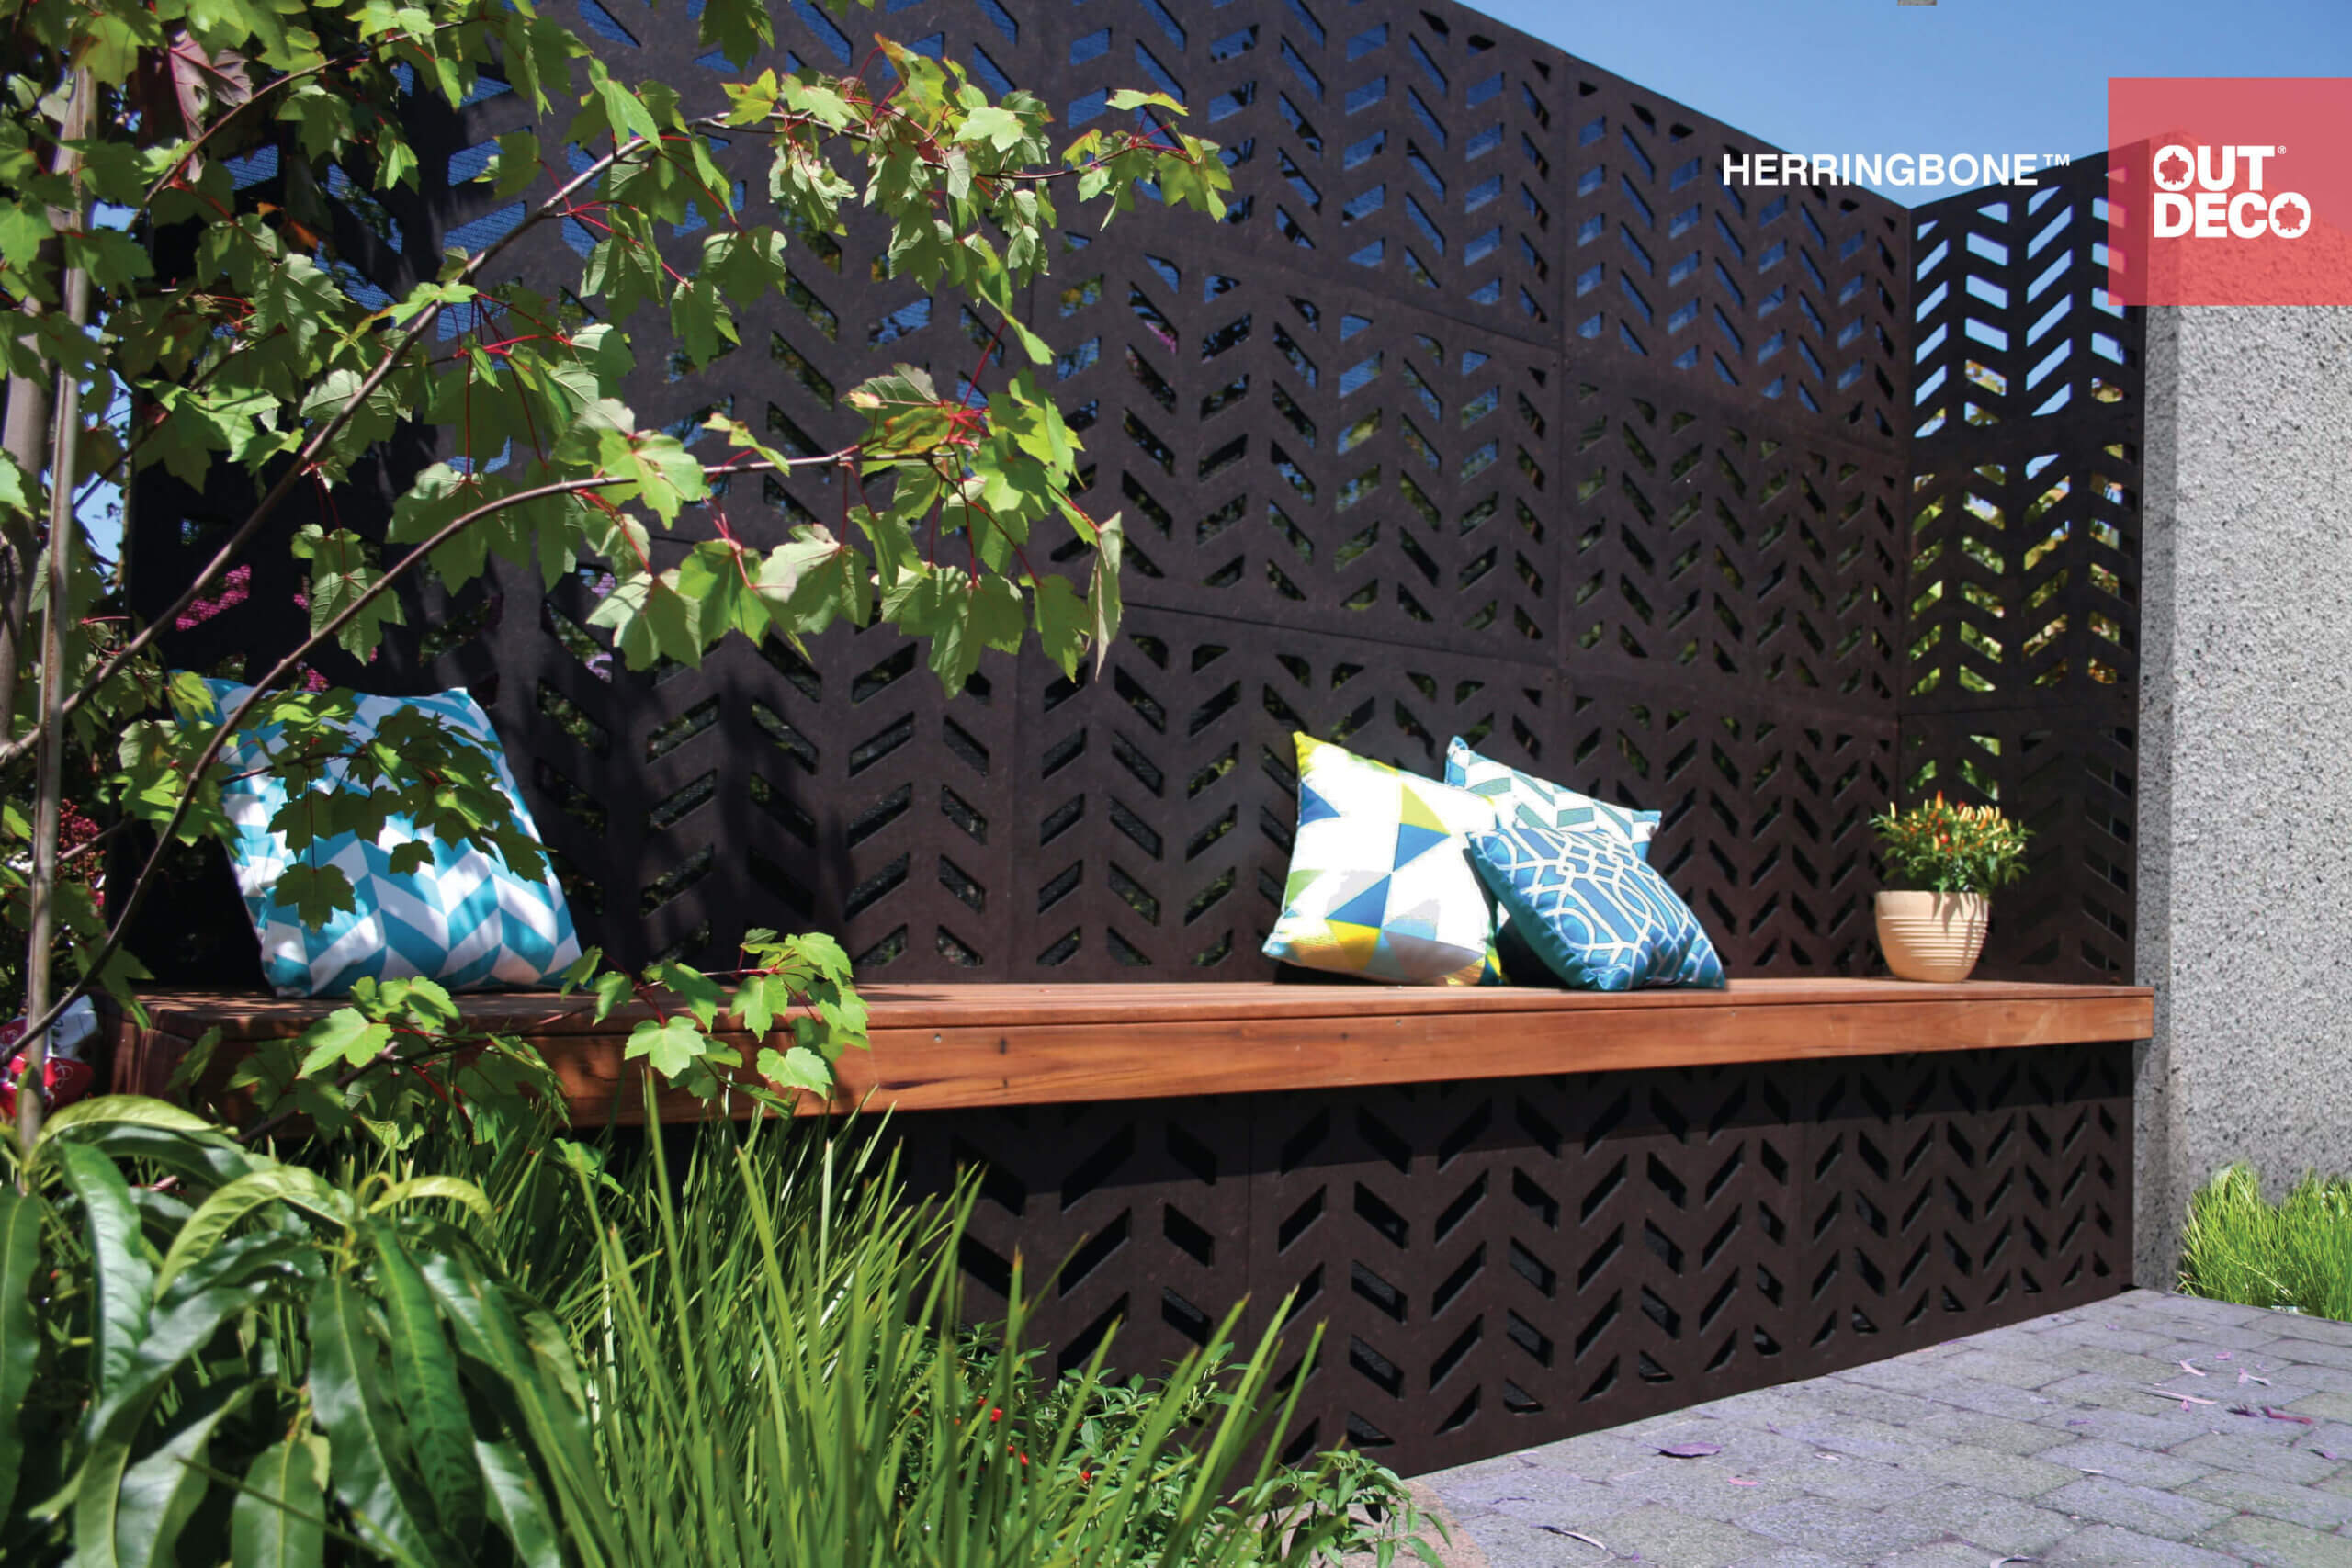 Decorative Screens and Garden Screens - #1 for Great Deals